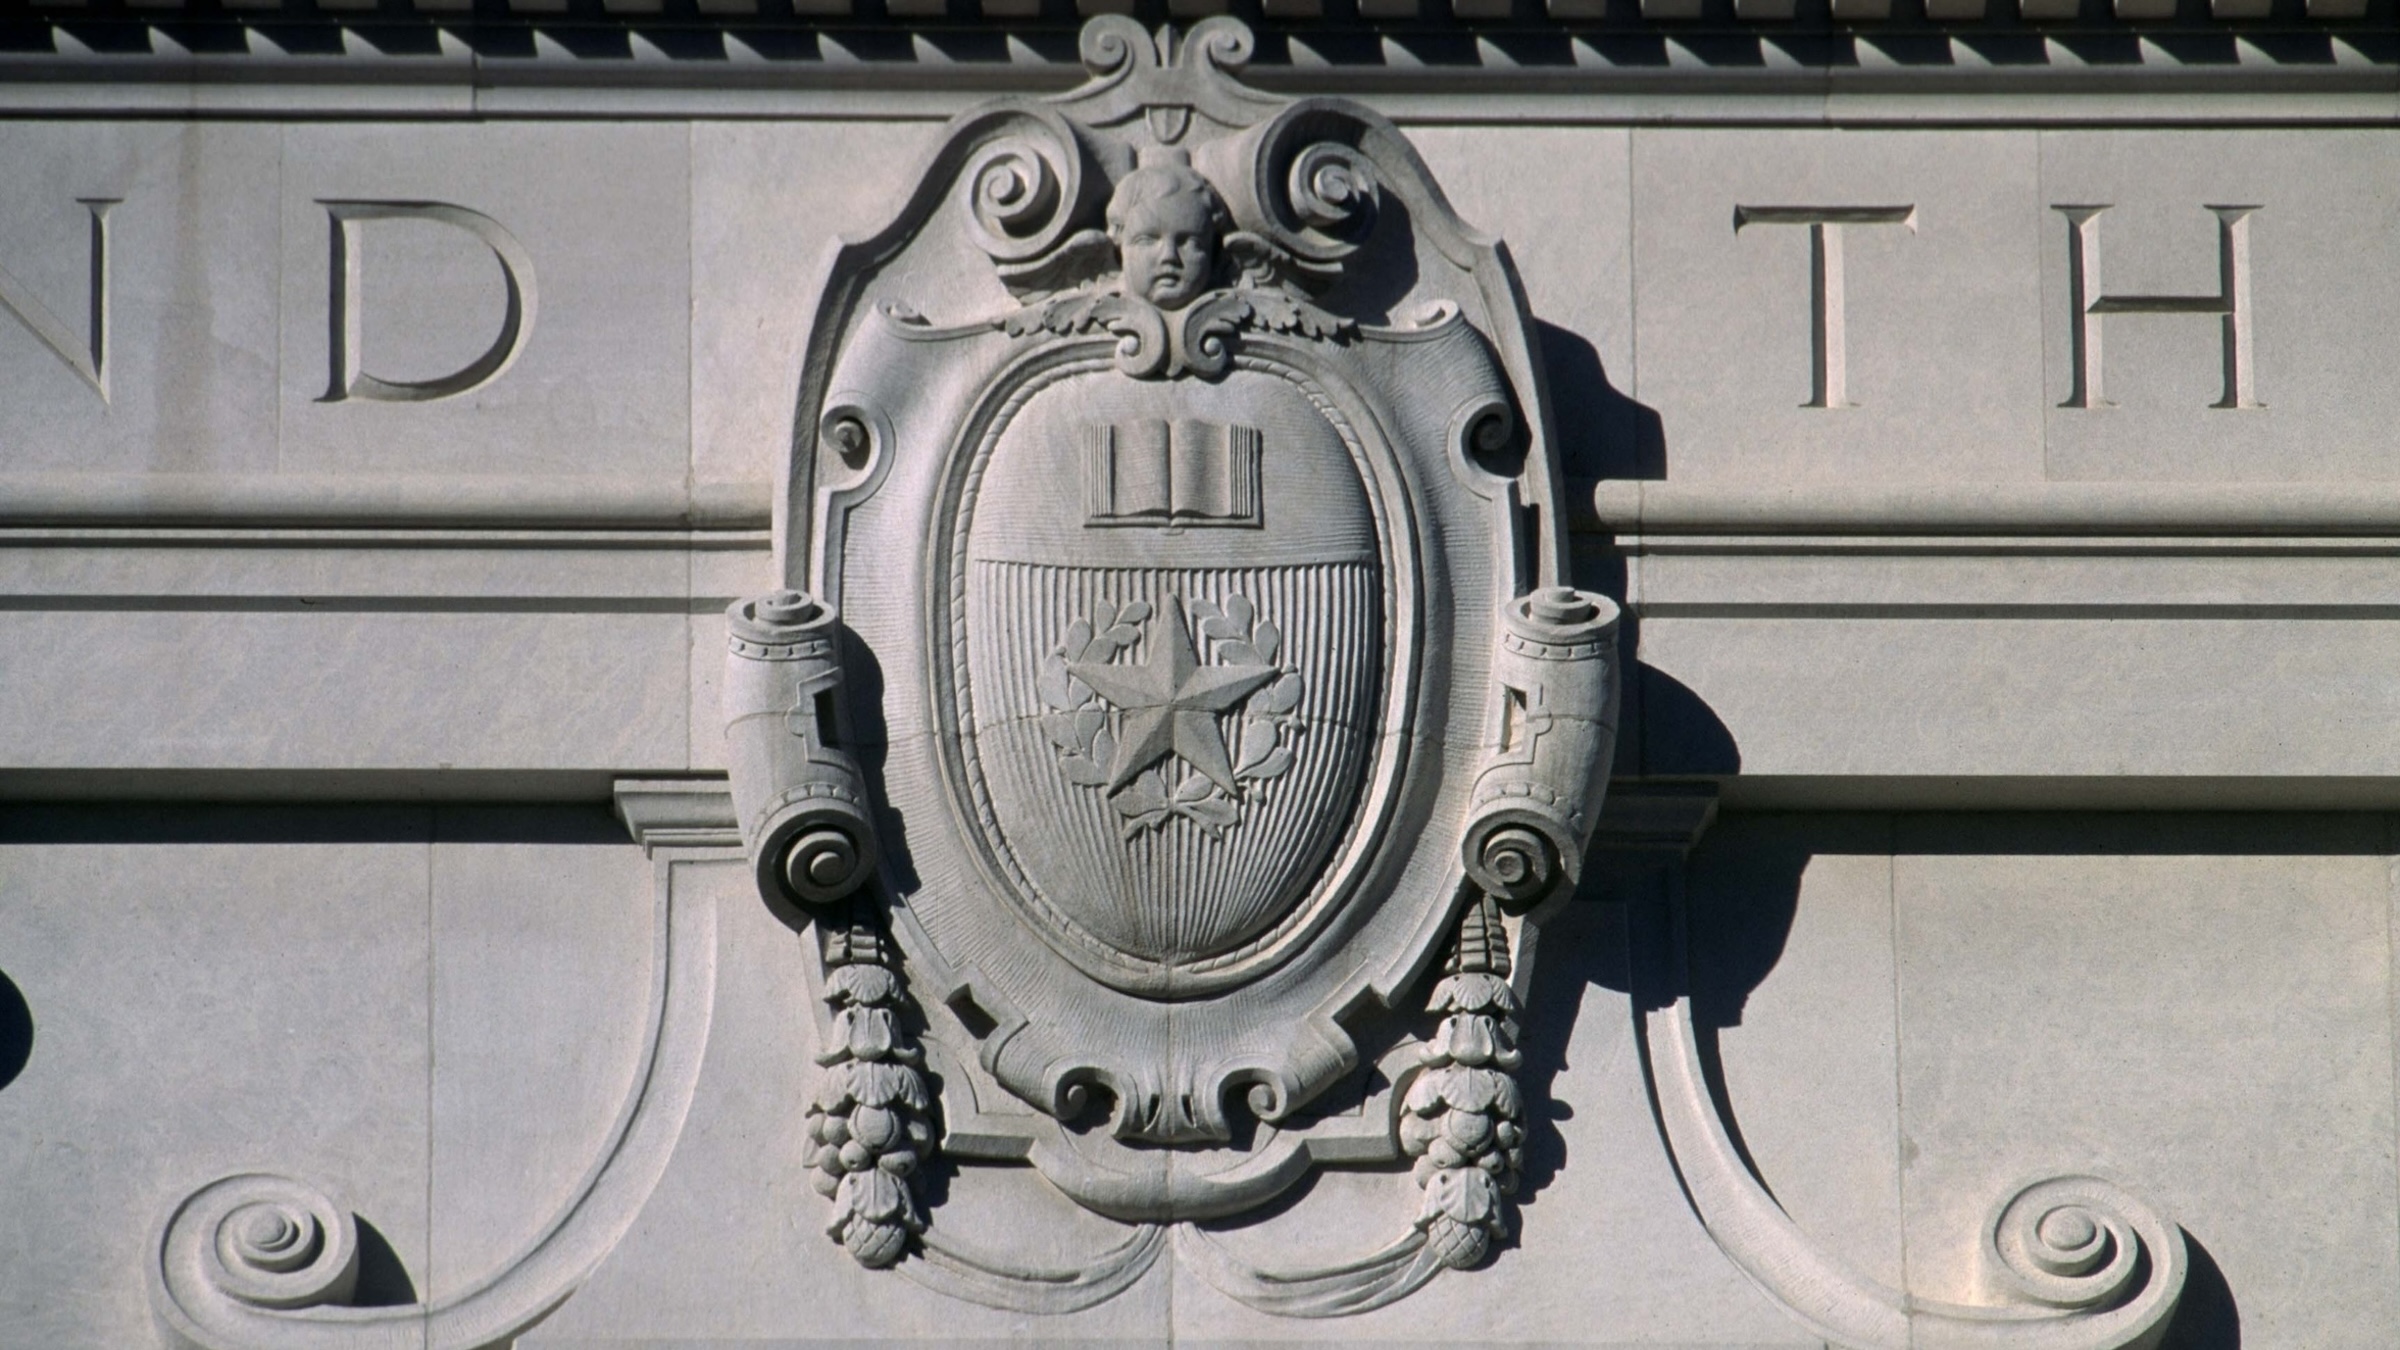 An architectural detail of the University of Texas seal showing a star, book and face cut in limestone on a building